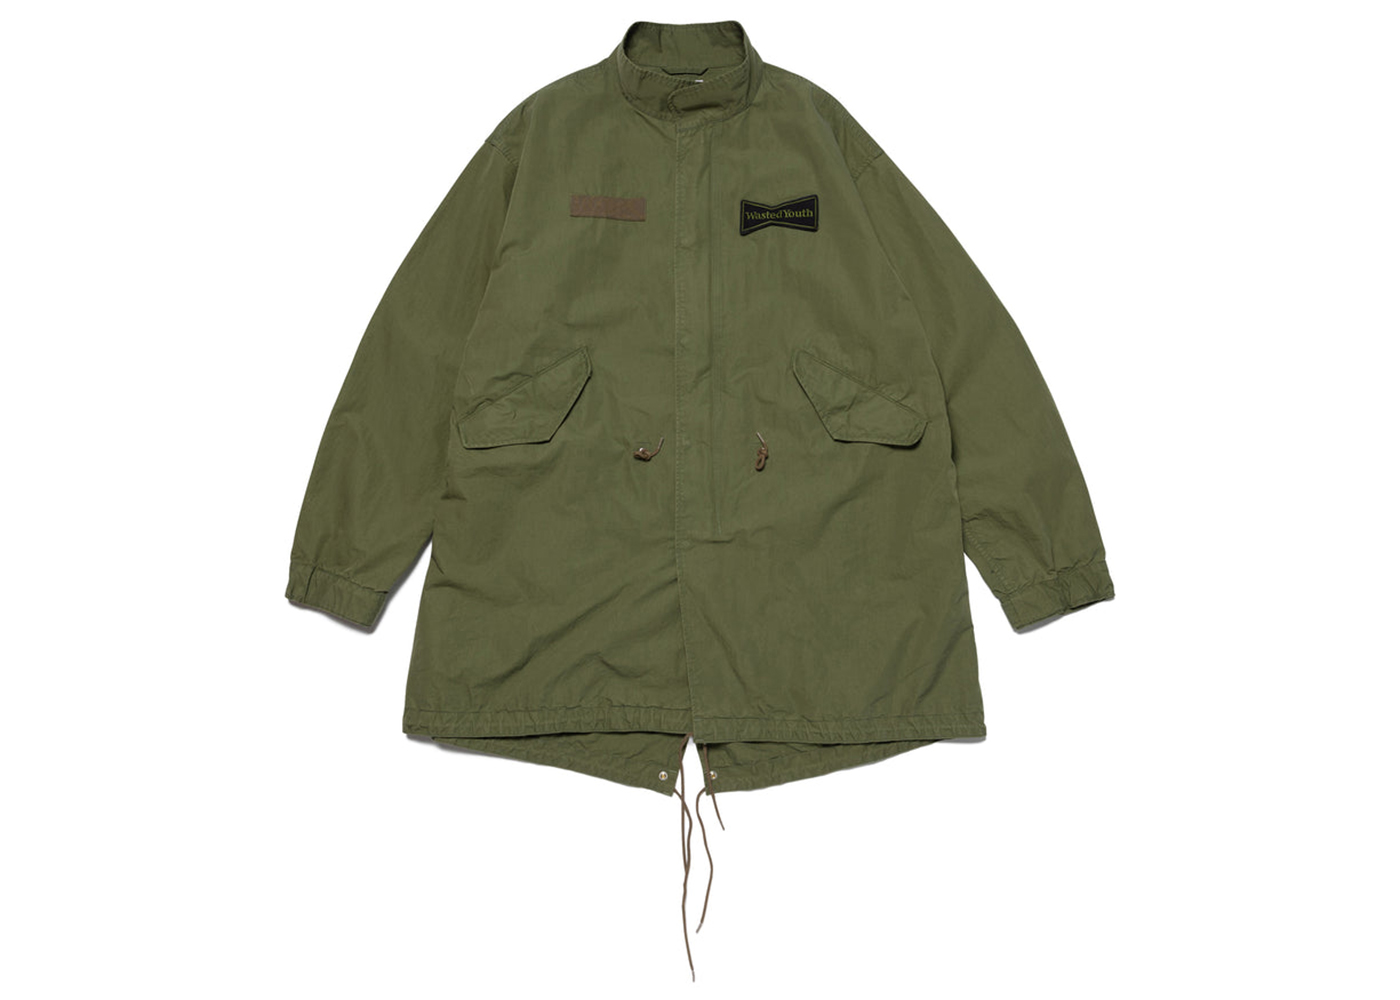 Wasted Youth Fishtail Coat Olive Drab